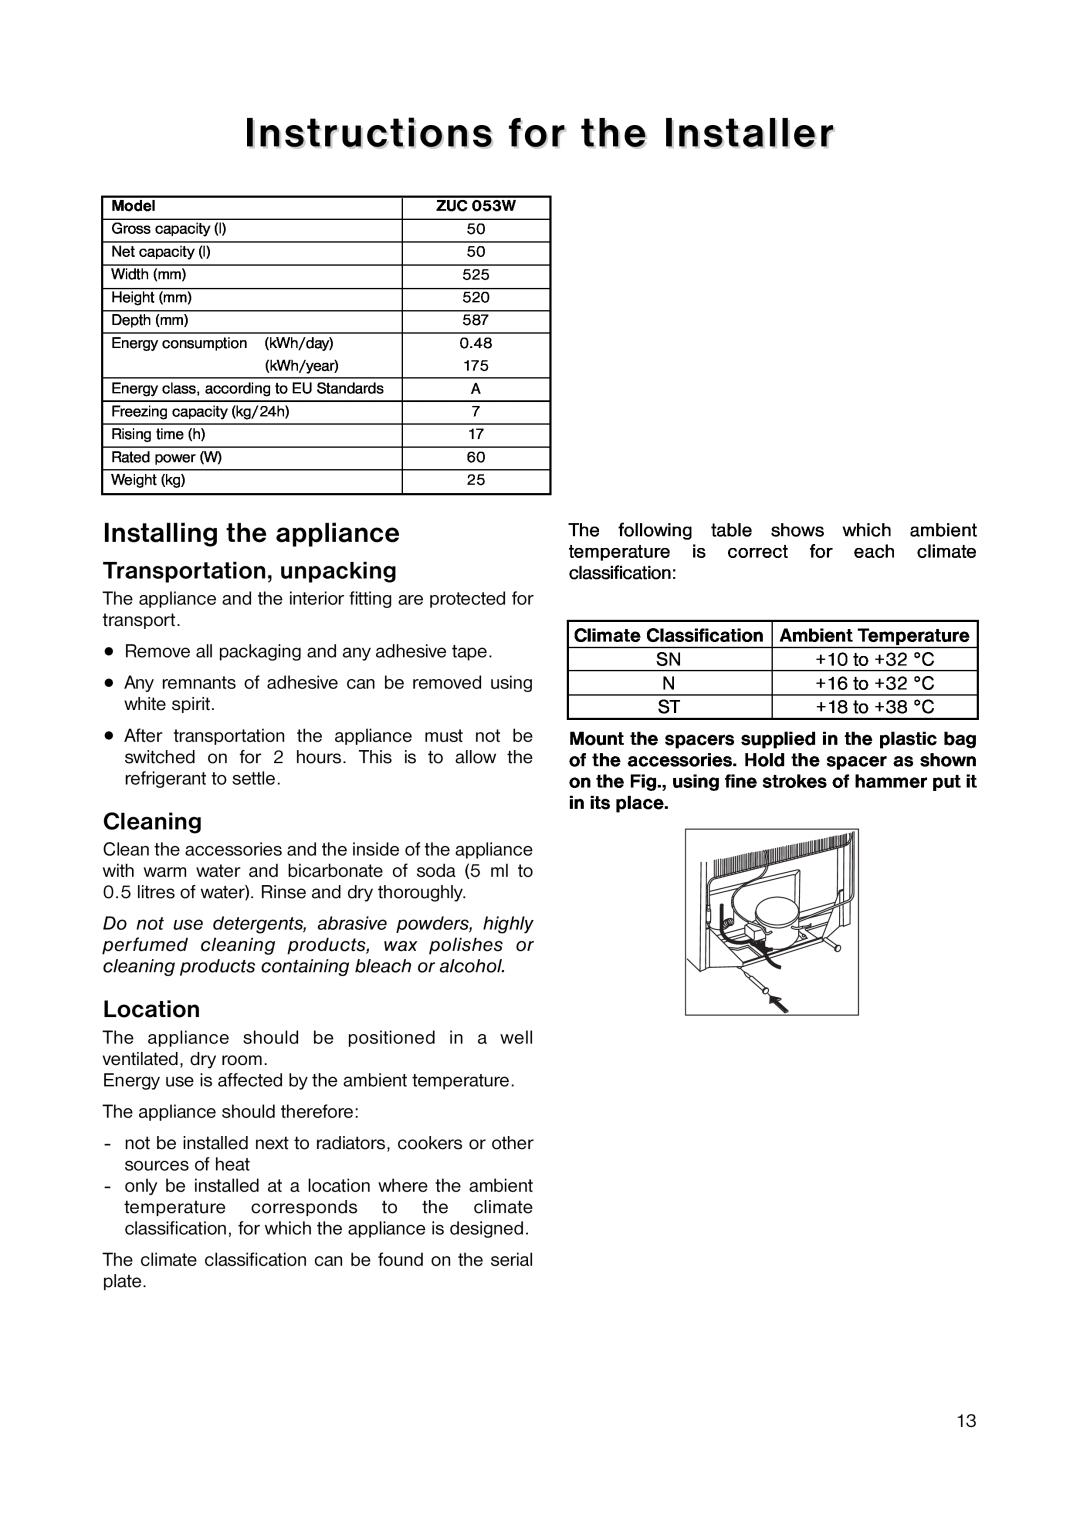 Zanussi ZUC 053W Instructions for the Installer, Installing the appliance, Transportation, unpacking, Cleaning, Location 